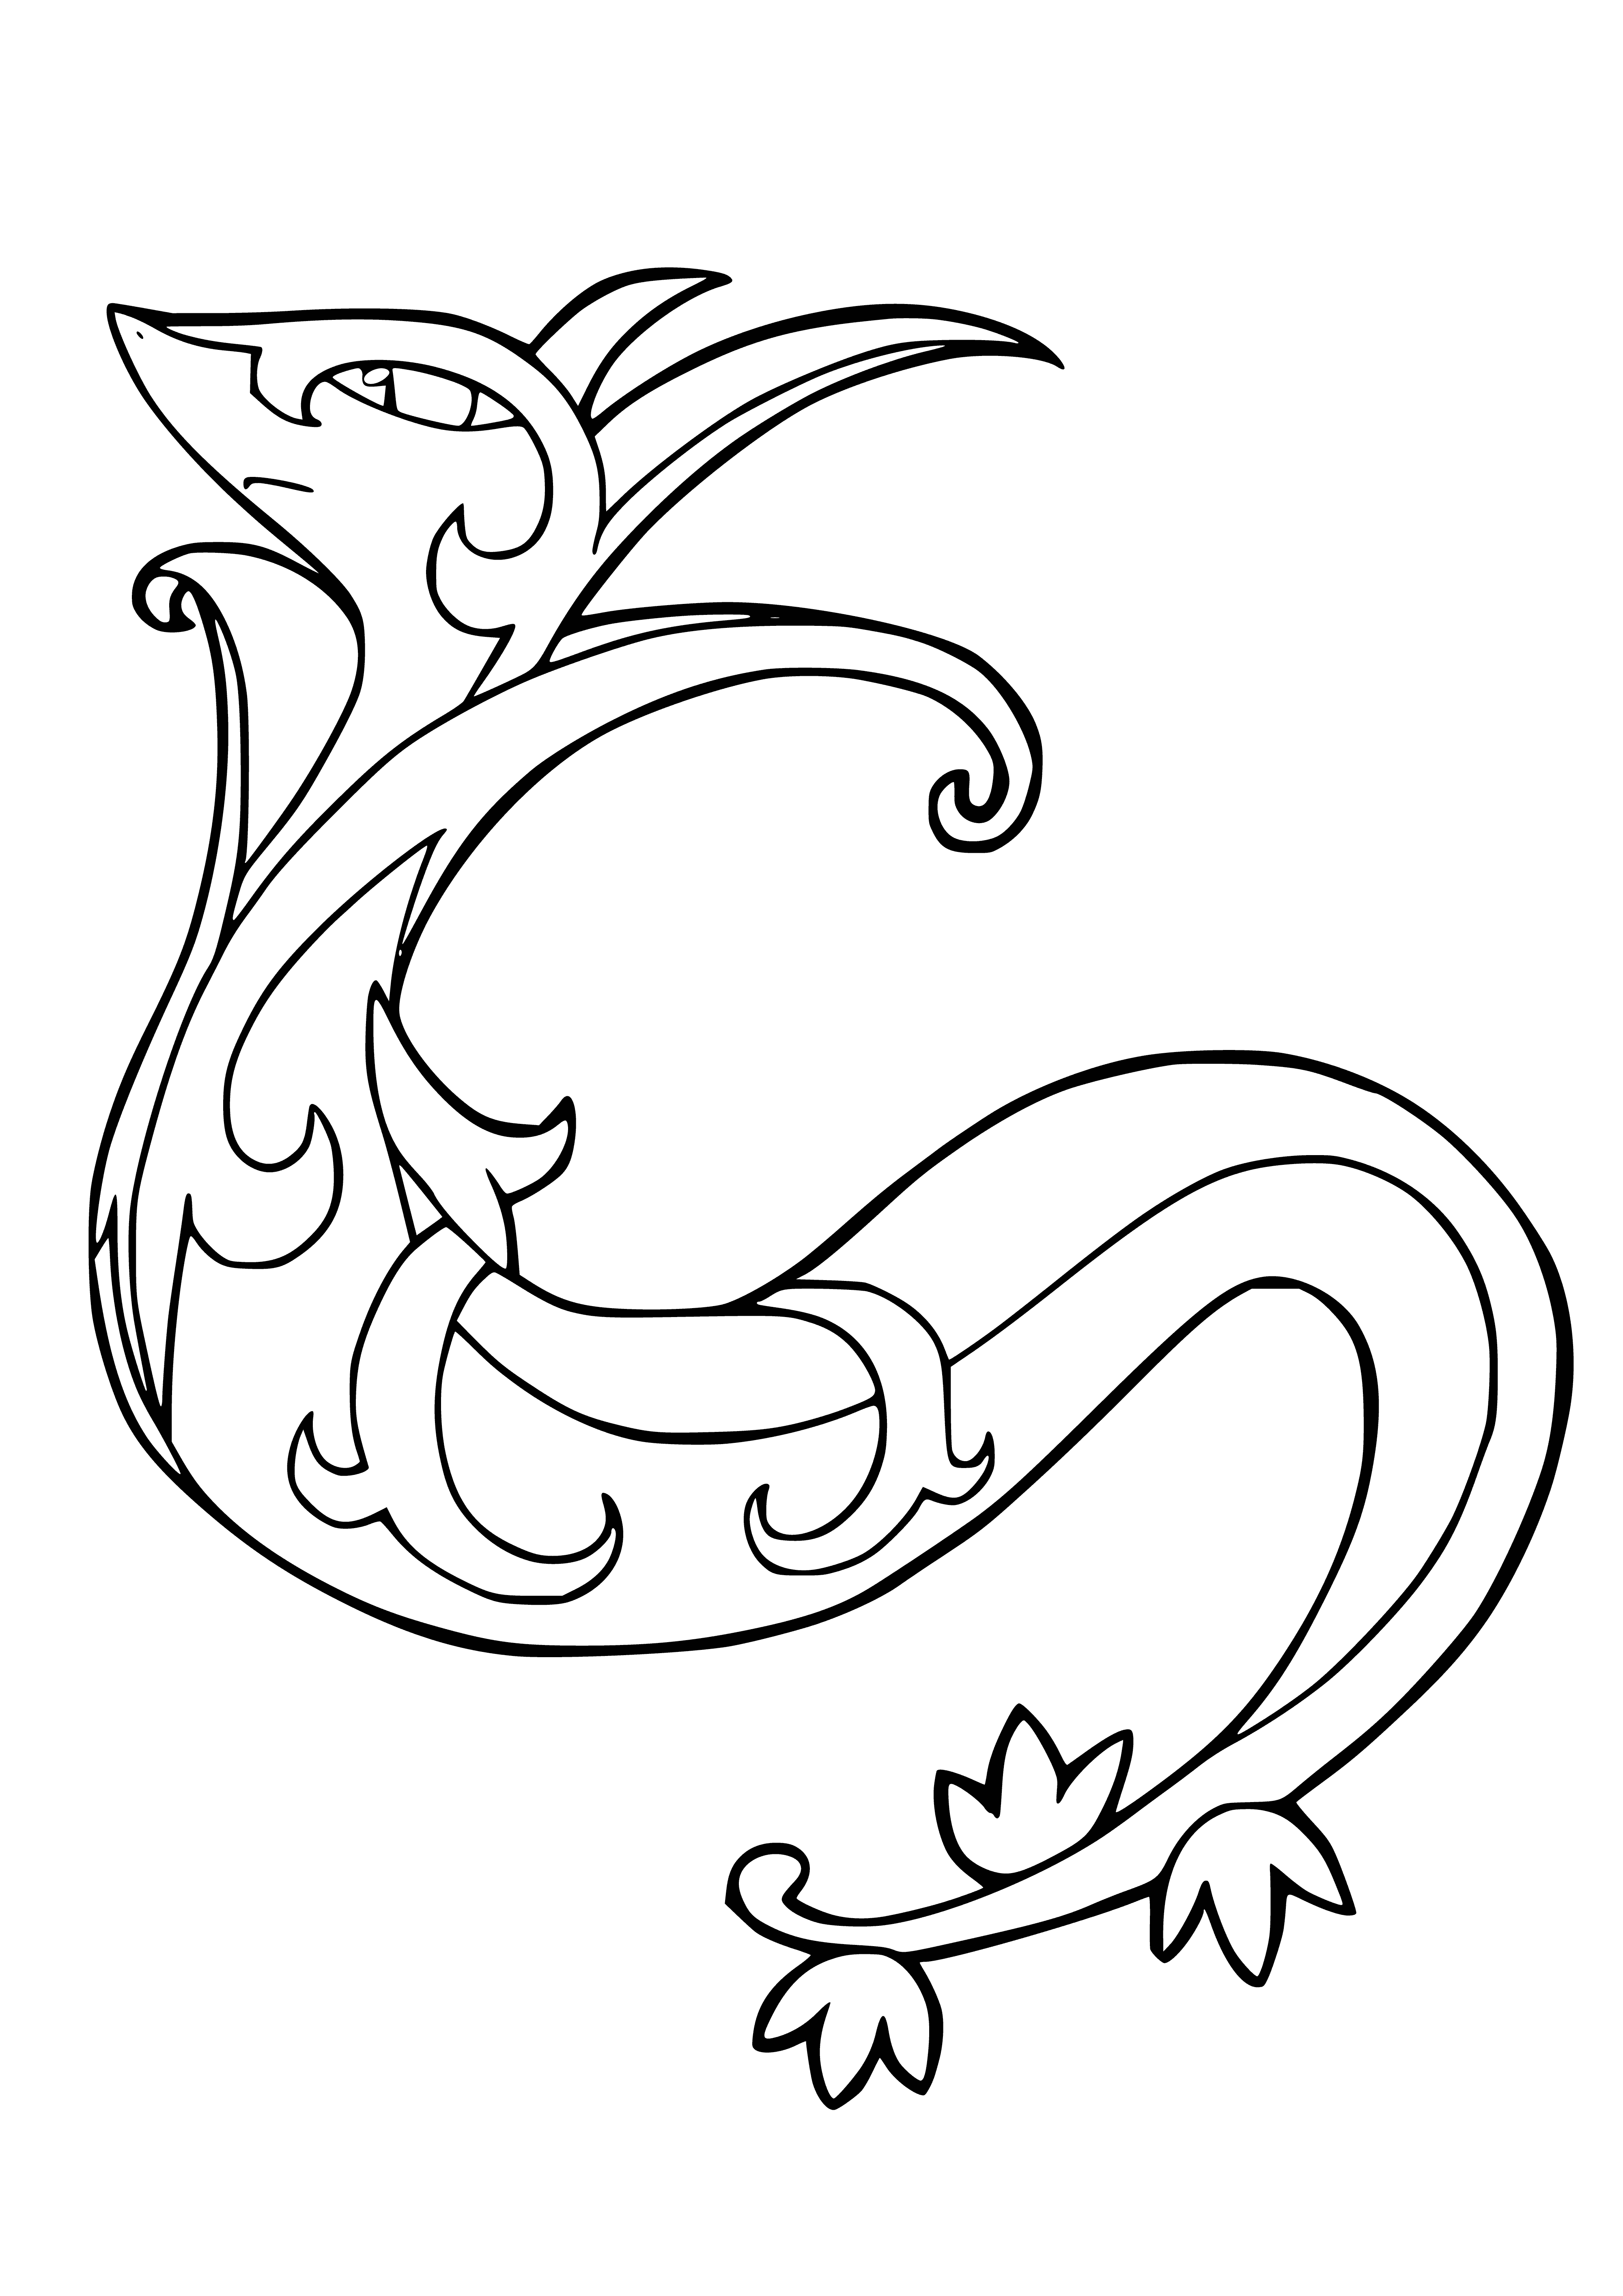 coloring page: Green snake-like pokemon w/white underside, yellow collar, slit pupils, long thin arms & tail, & yellow crest on head.